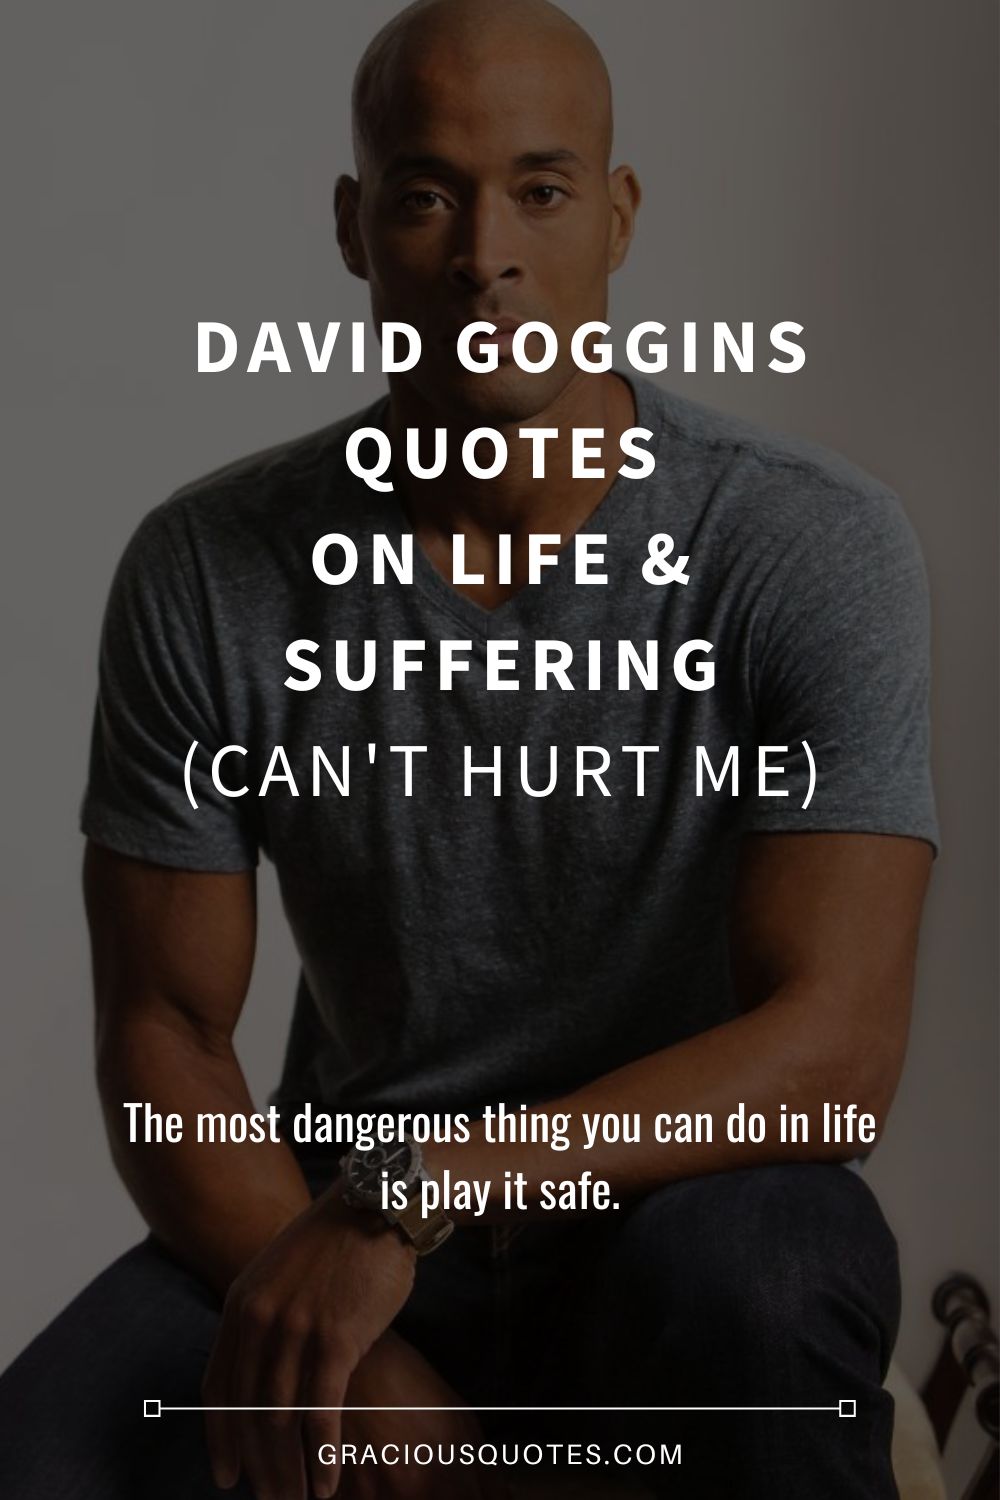 David Goggins Quotes on Life & Suffering (CAN'T HURT ME) - Gracious Quotes